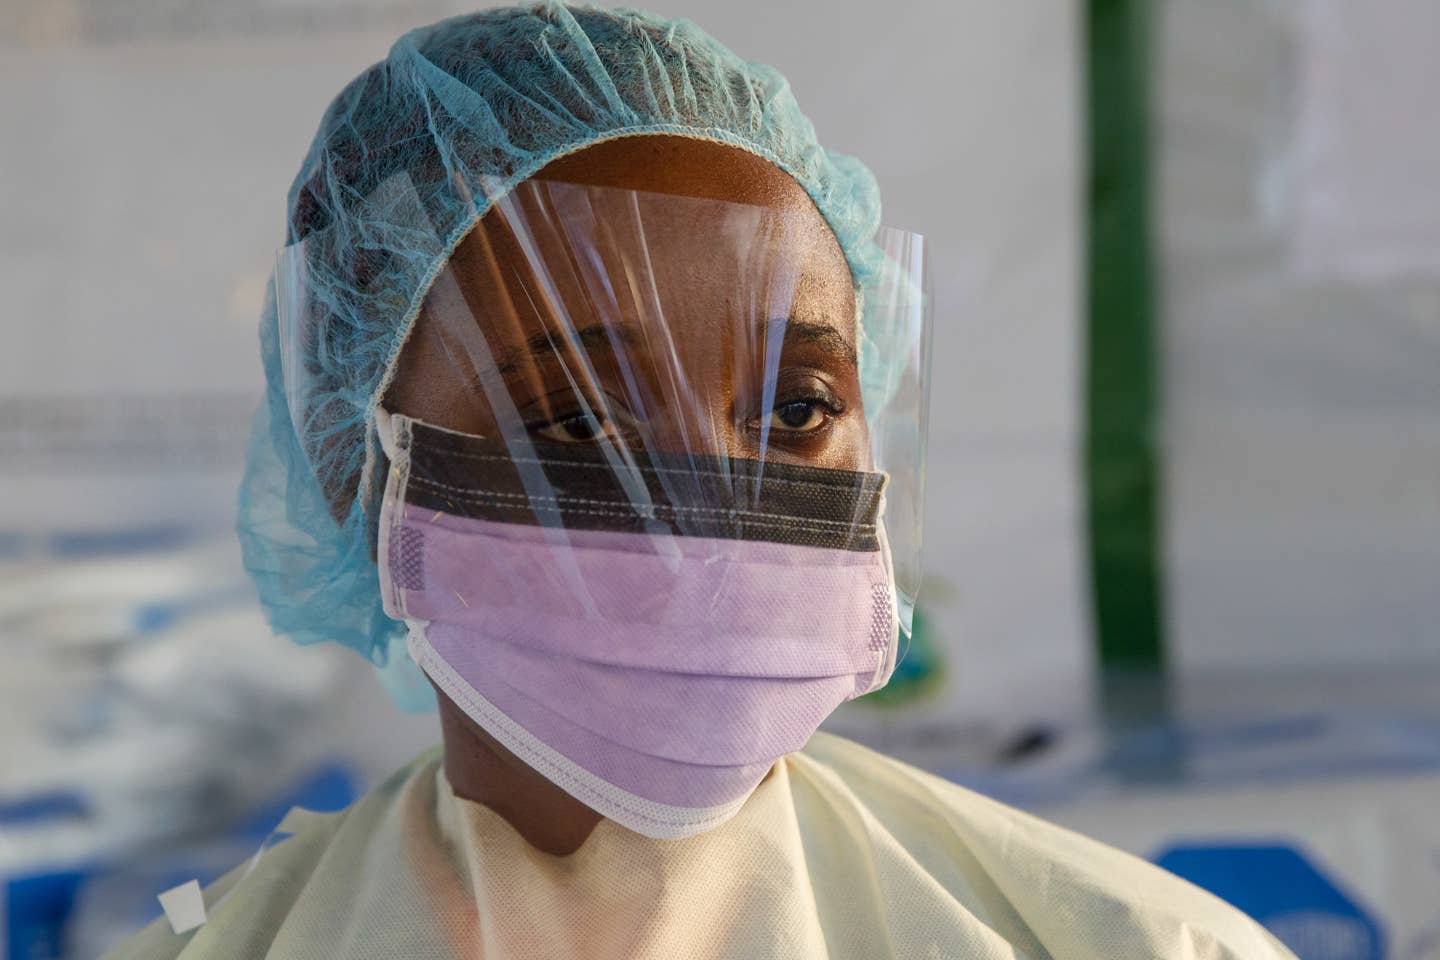 Siah Tamba is an Ebola survivor who now works at the Ebola treatment unitu00a0in Sinje, Grand Cape Mount, Liberia, after losing her mother, sister, and daughter.